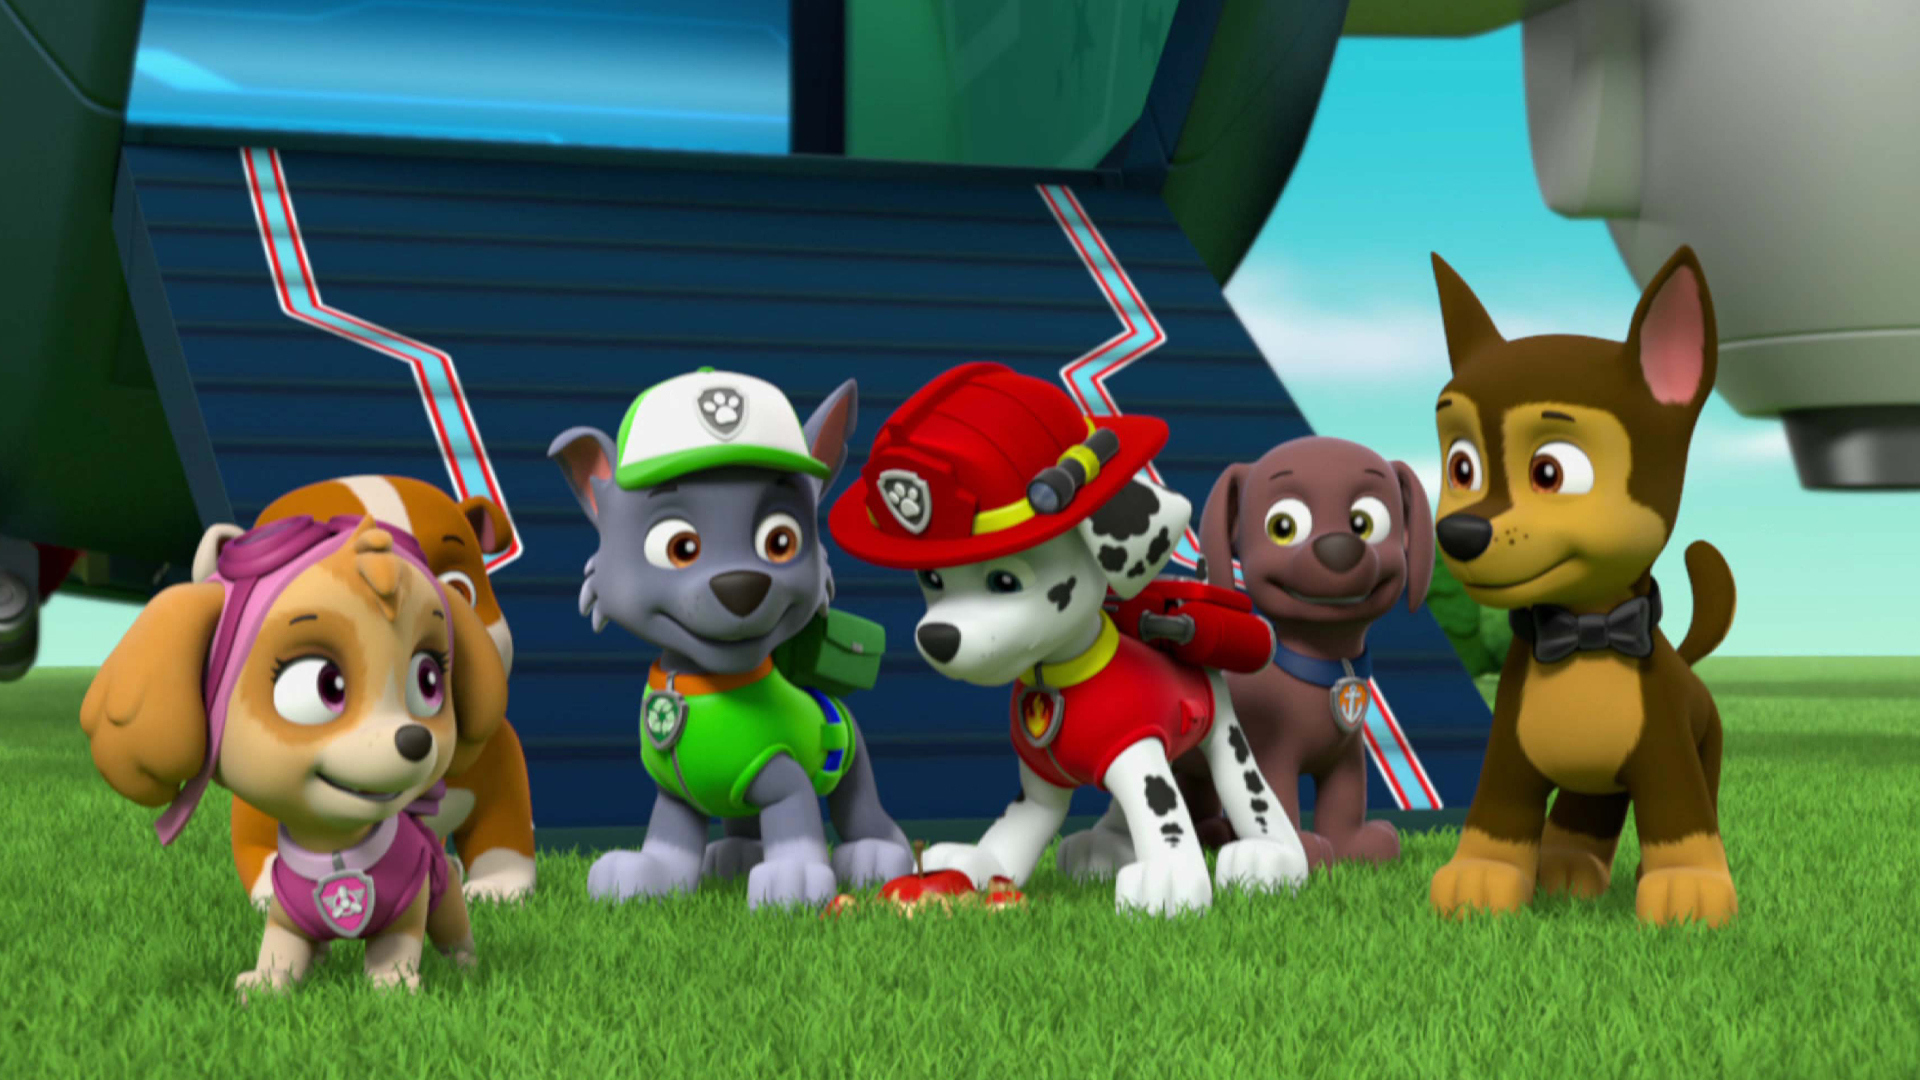 PAW Patrol Ultimate Rescue: Pups Save the Tigers (TV Episode 2018) - IMDb